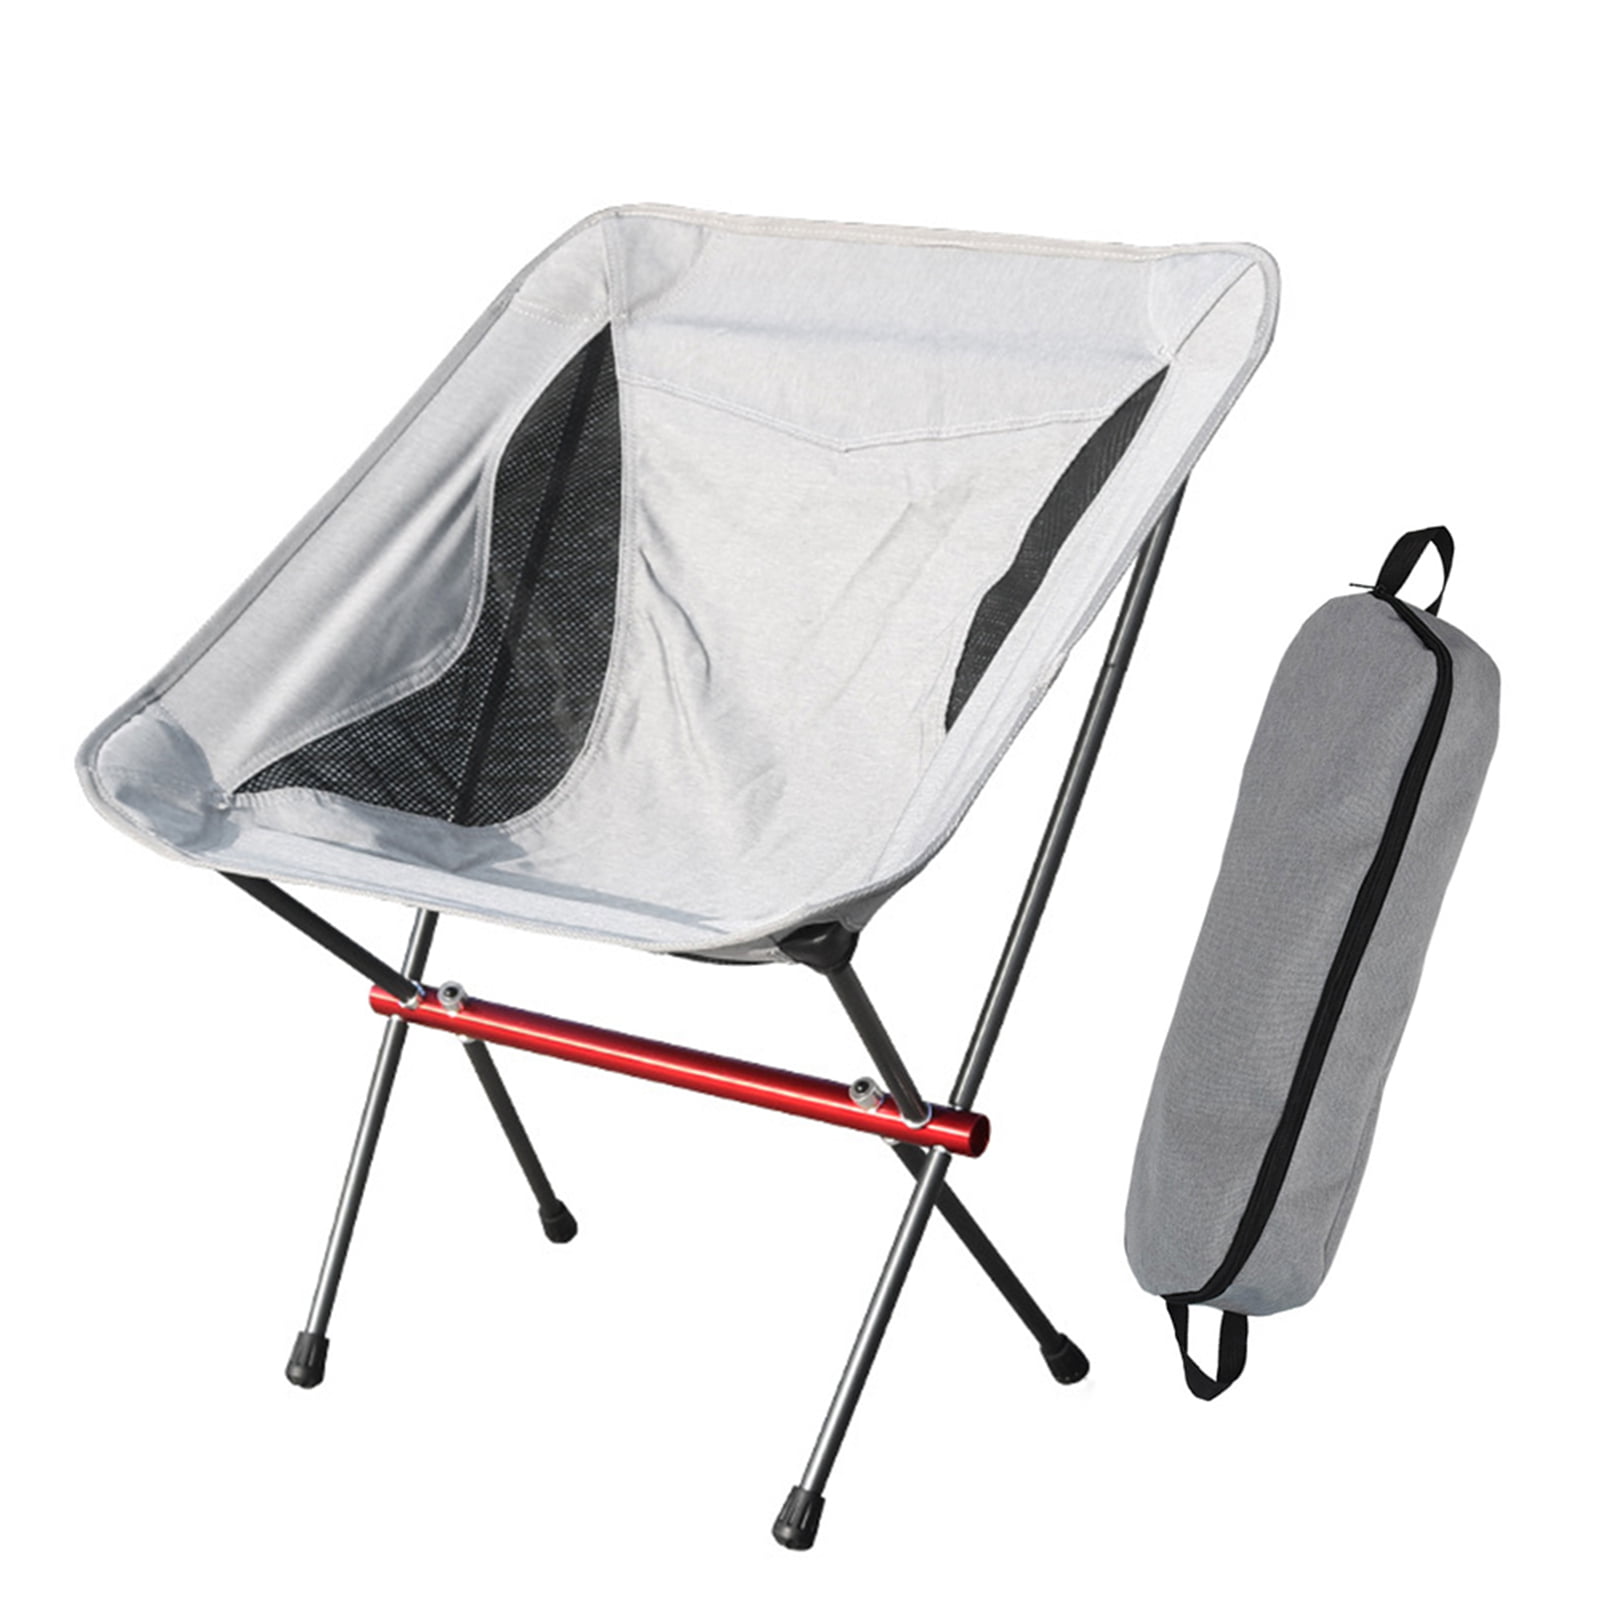 KingCamp Ultralight Compact High Back Camping Folding Chair with Headrest Support Up to 150 KG